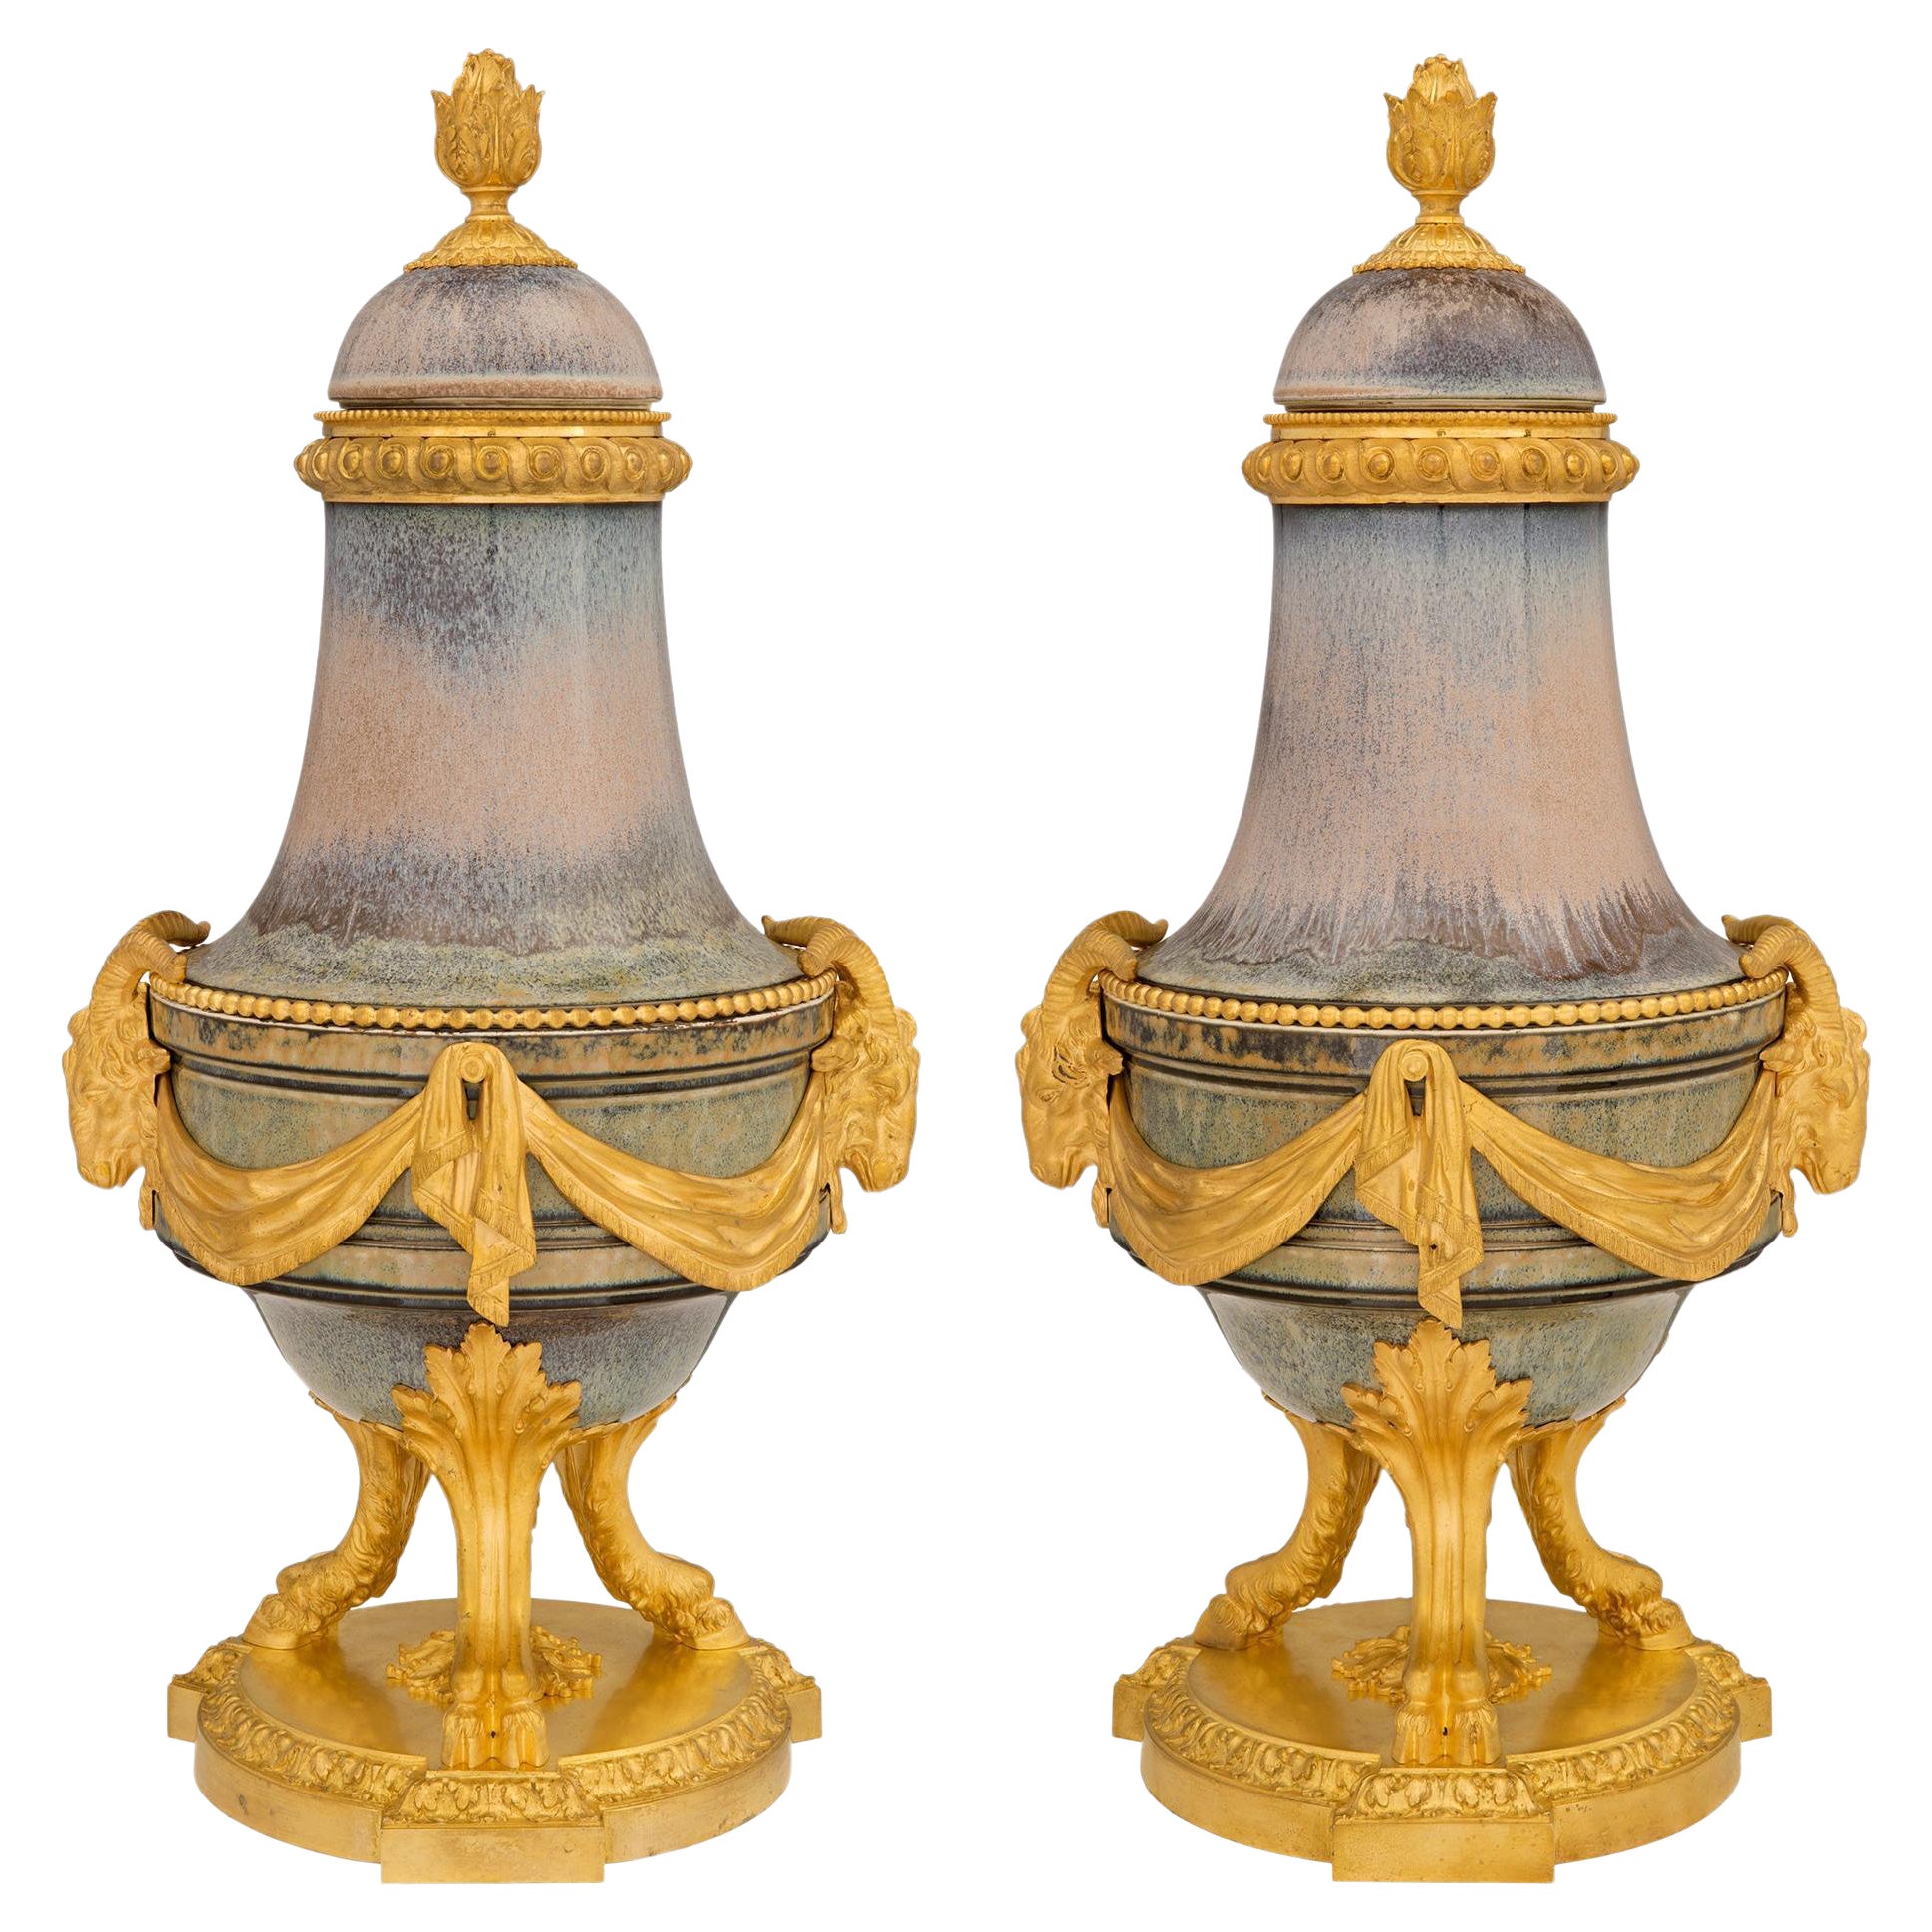 Pair of French 19th Century Louis XVI St. Porcelain and Ormolu Lidded Urns